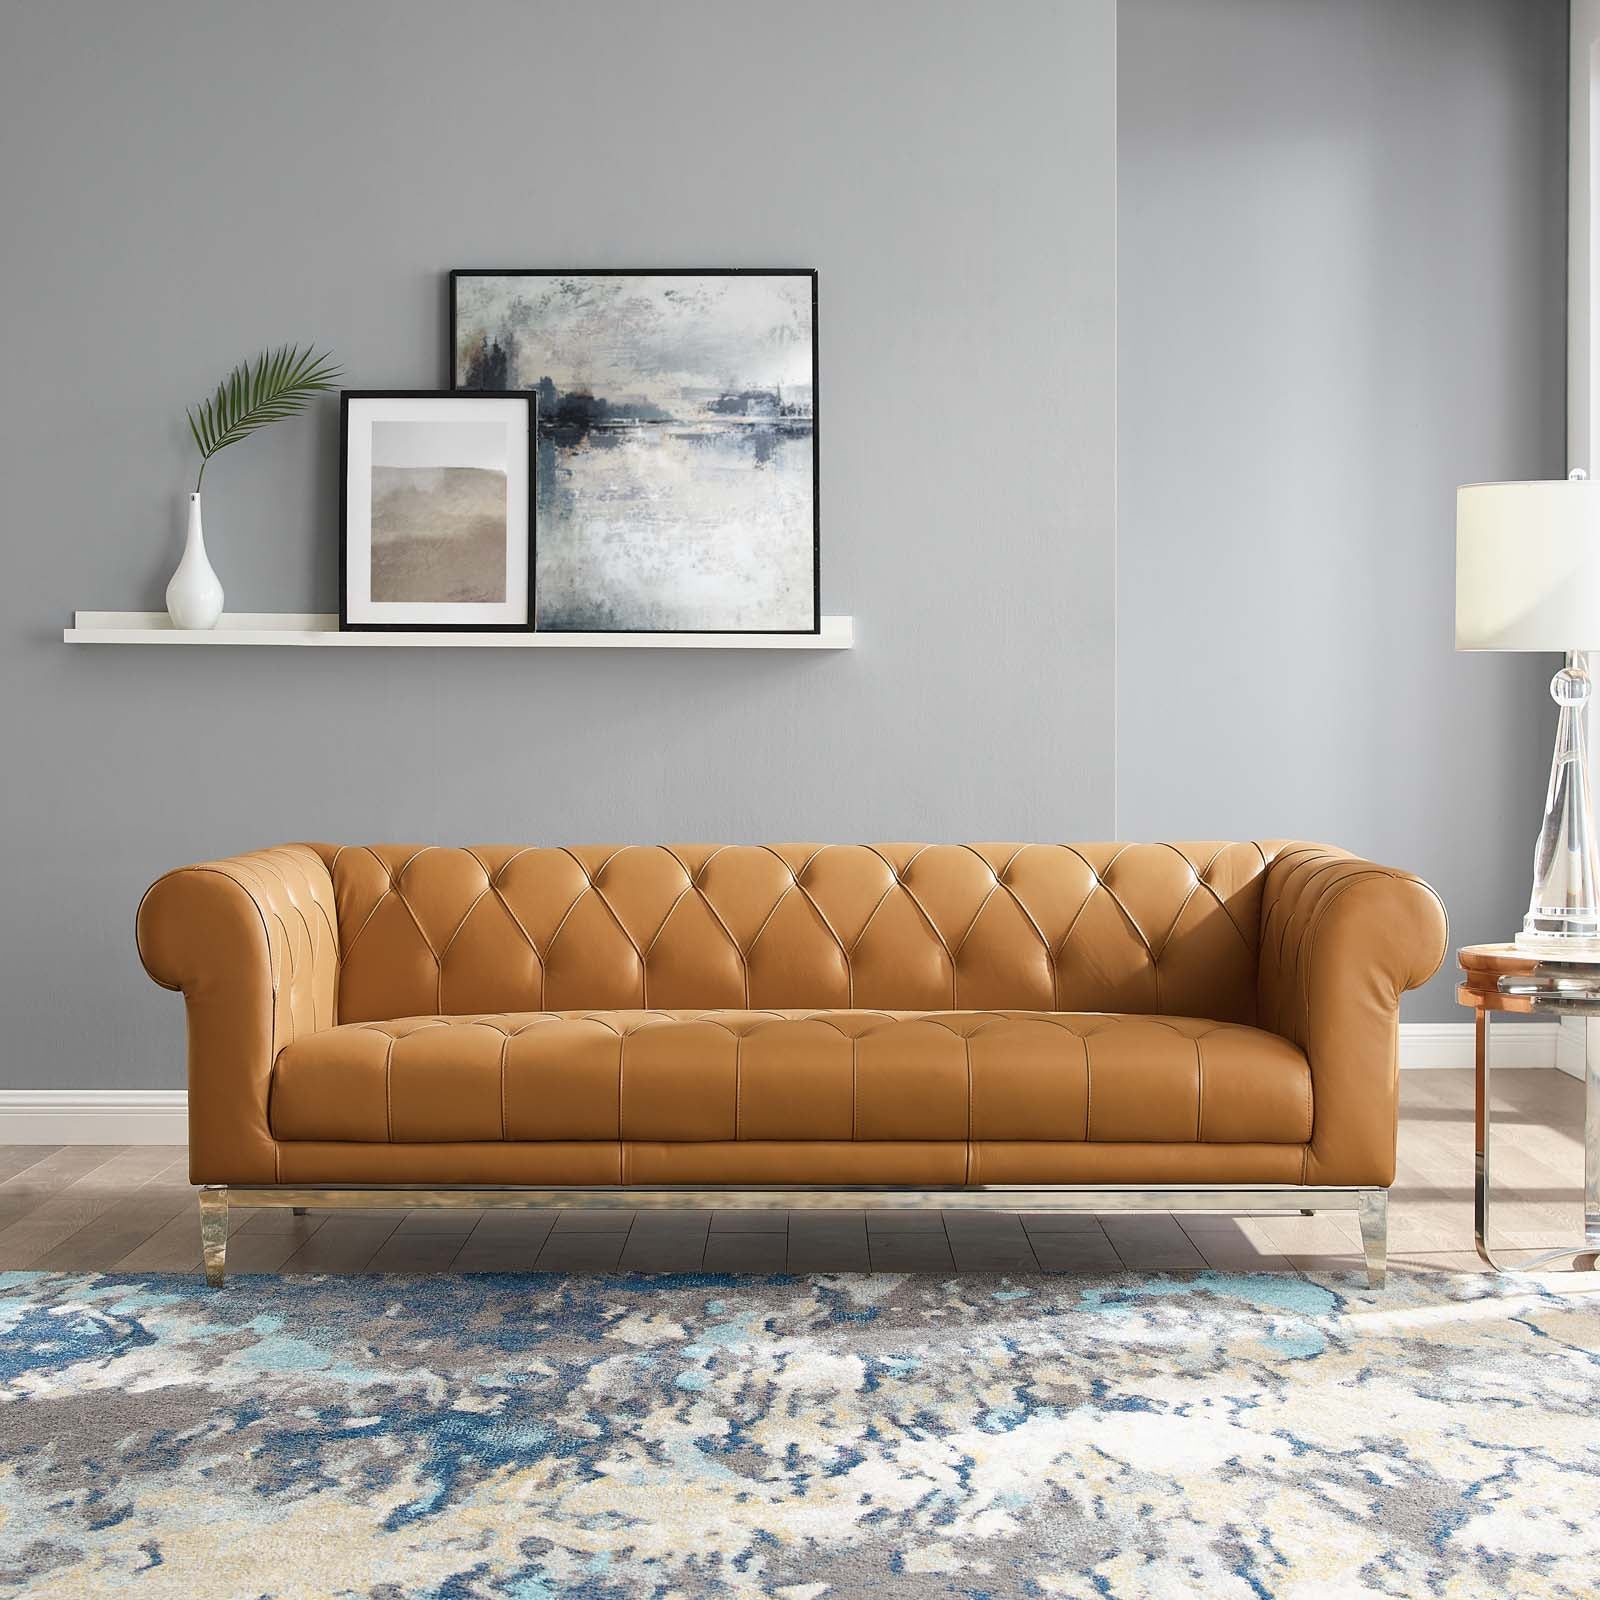 Idyll Tufted Button Upholstered Leather Chesterfield Sofa - East Shore Modern Home Furnishings